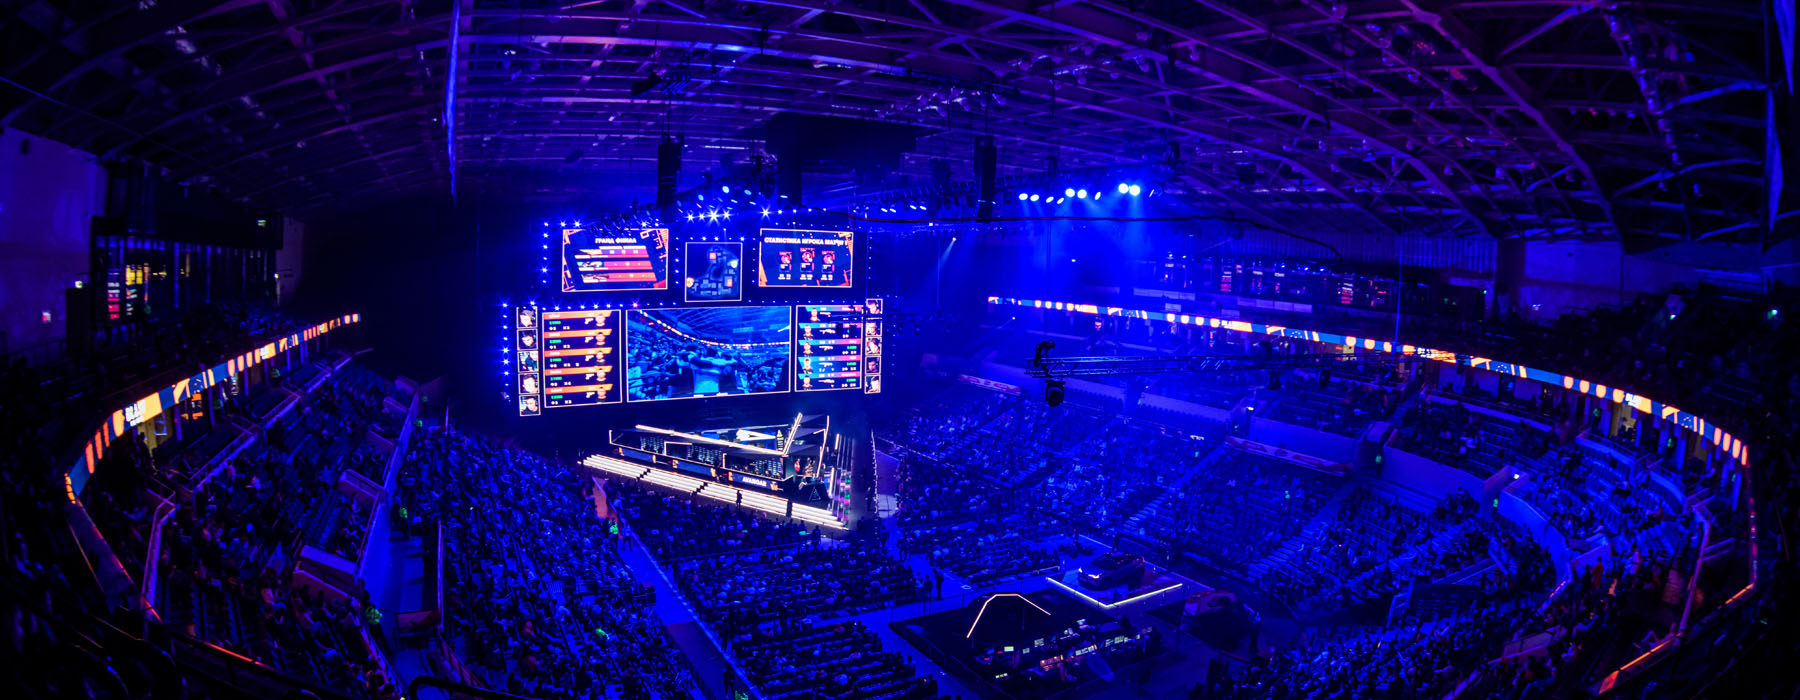 Dark arena full of people watching e-sports